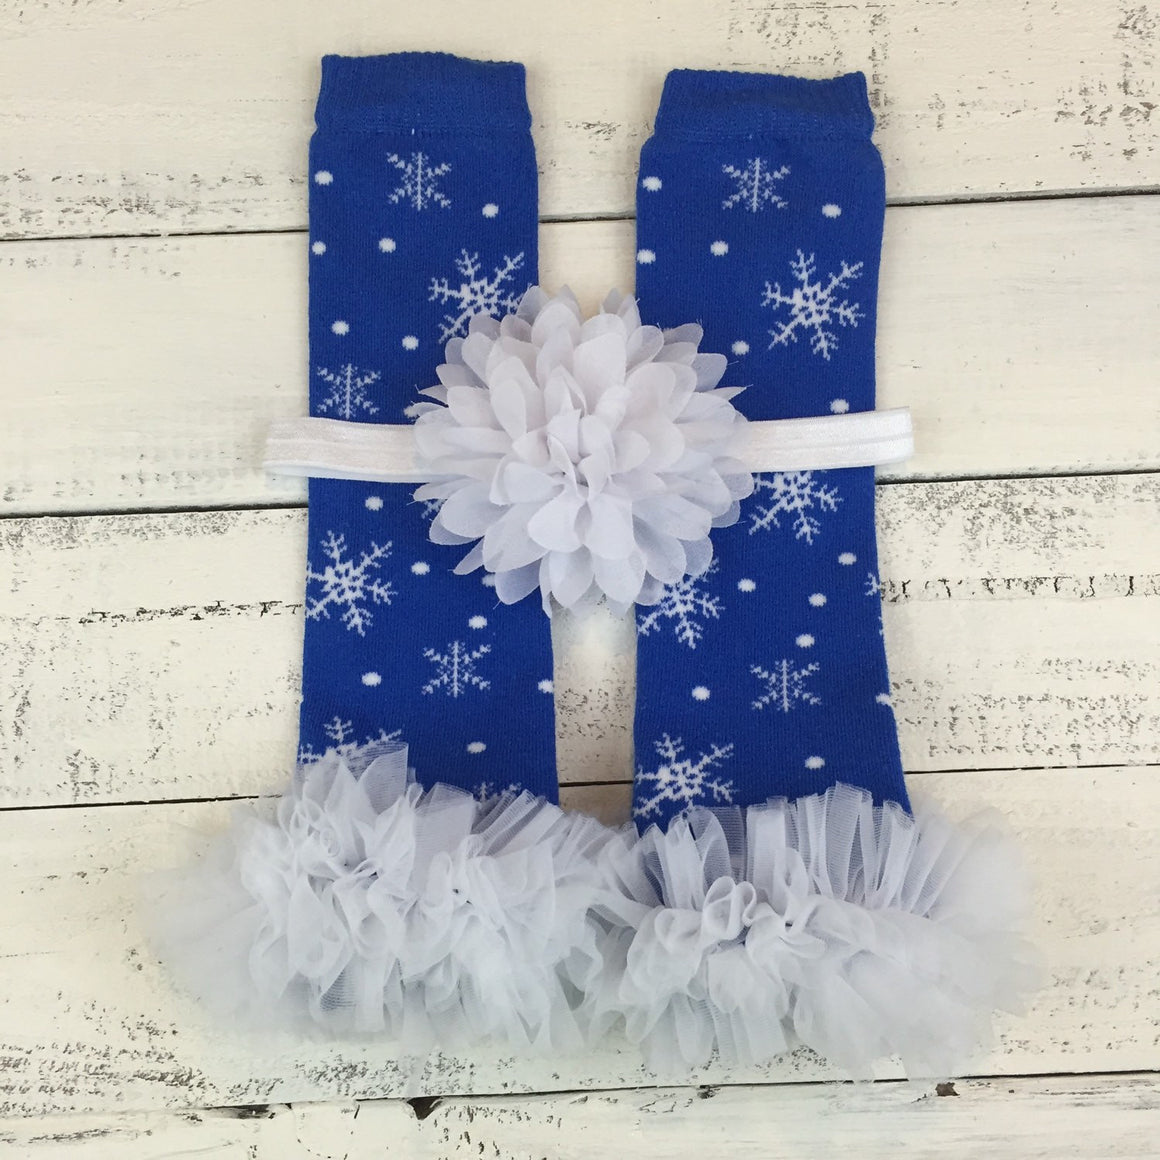 Leg Warmers - Blue Snowflakes, matching flower headband and bloomers - HoneyLoveBoutique